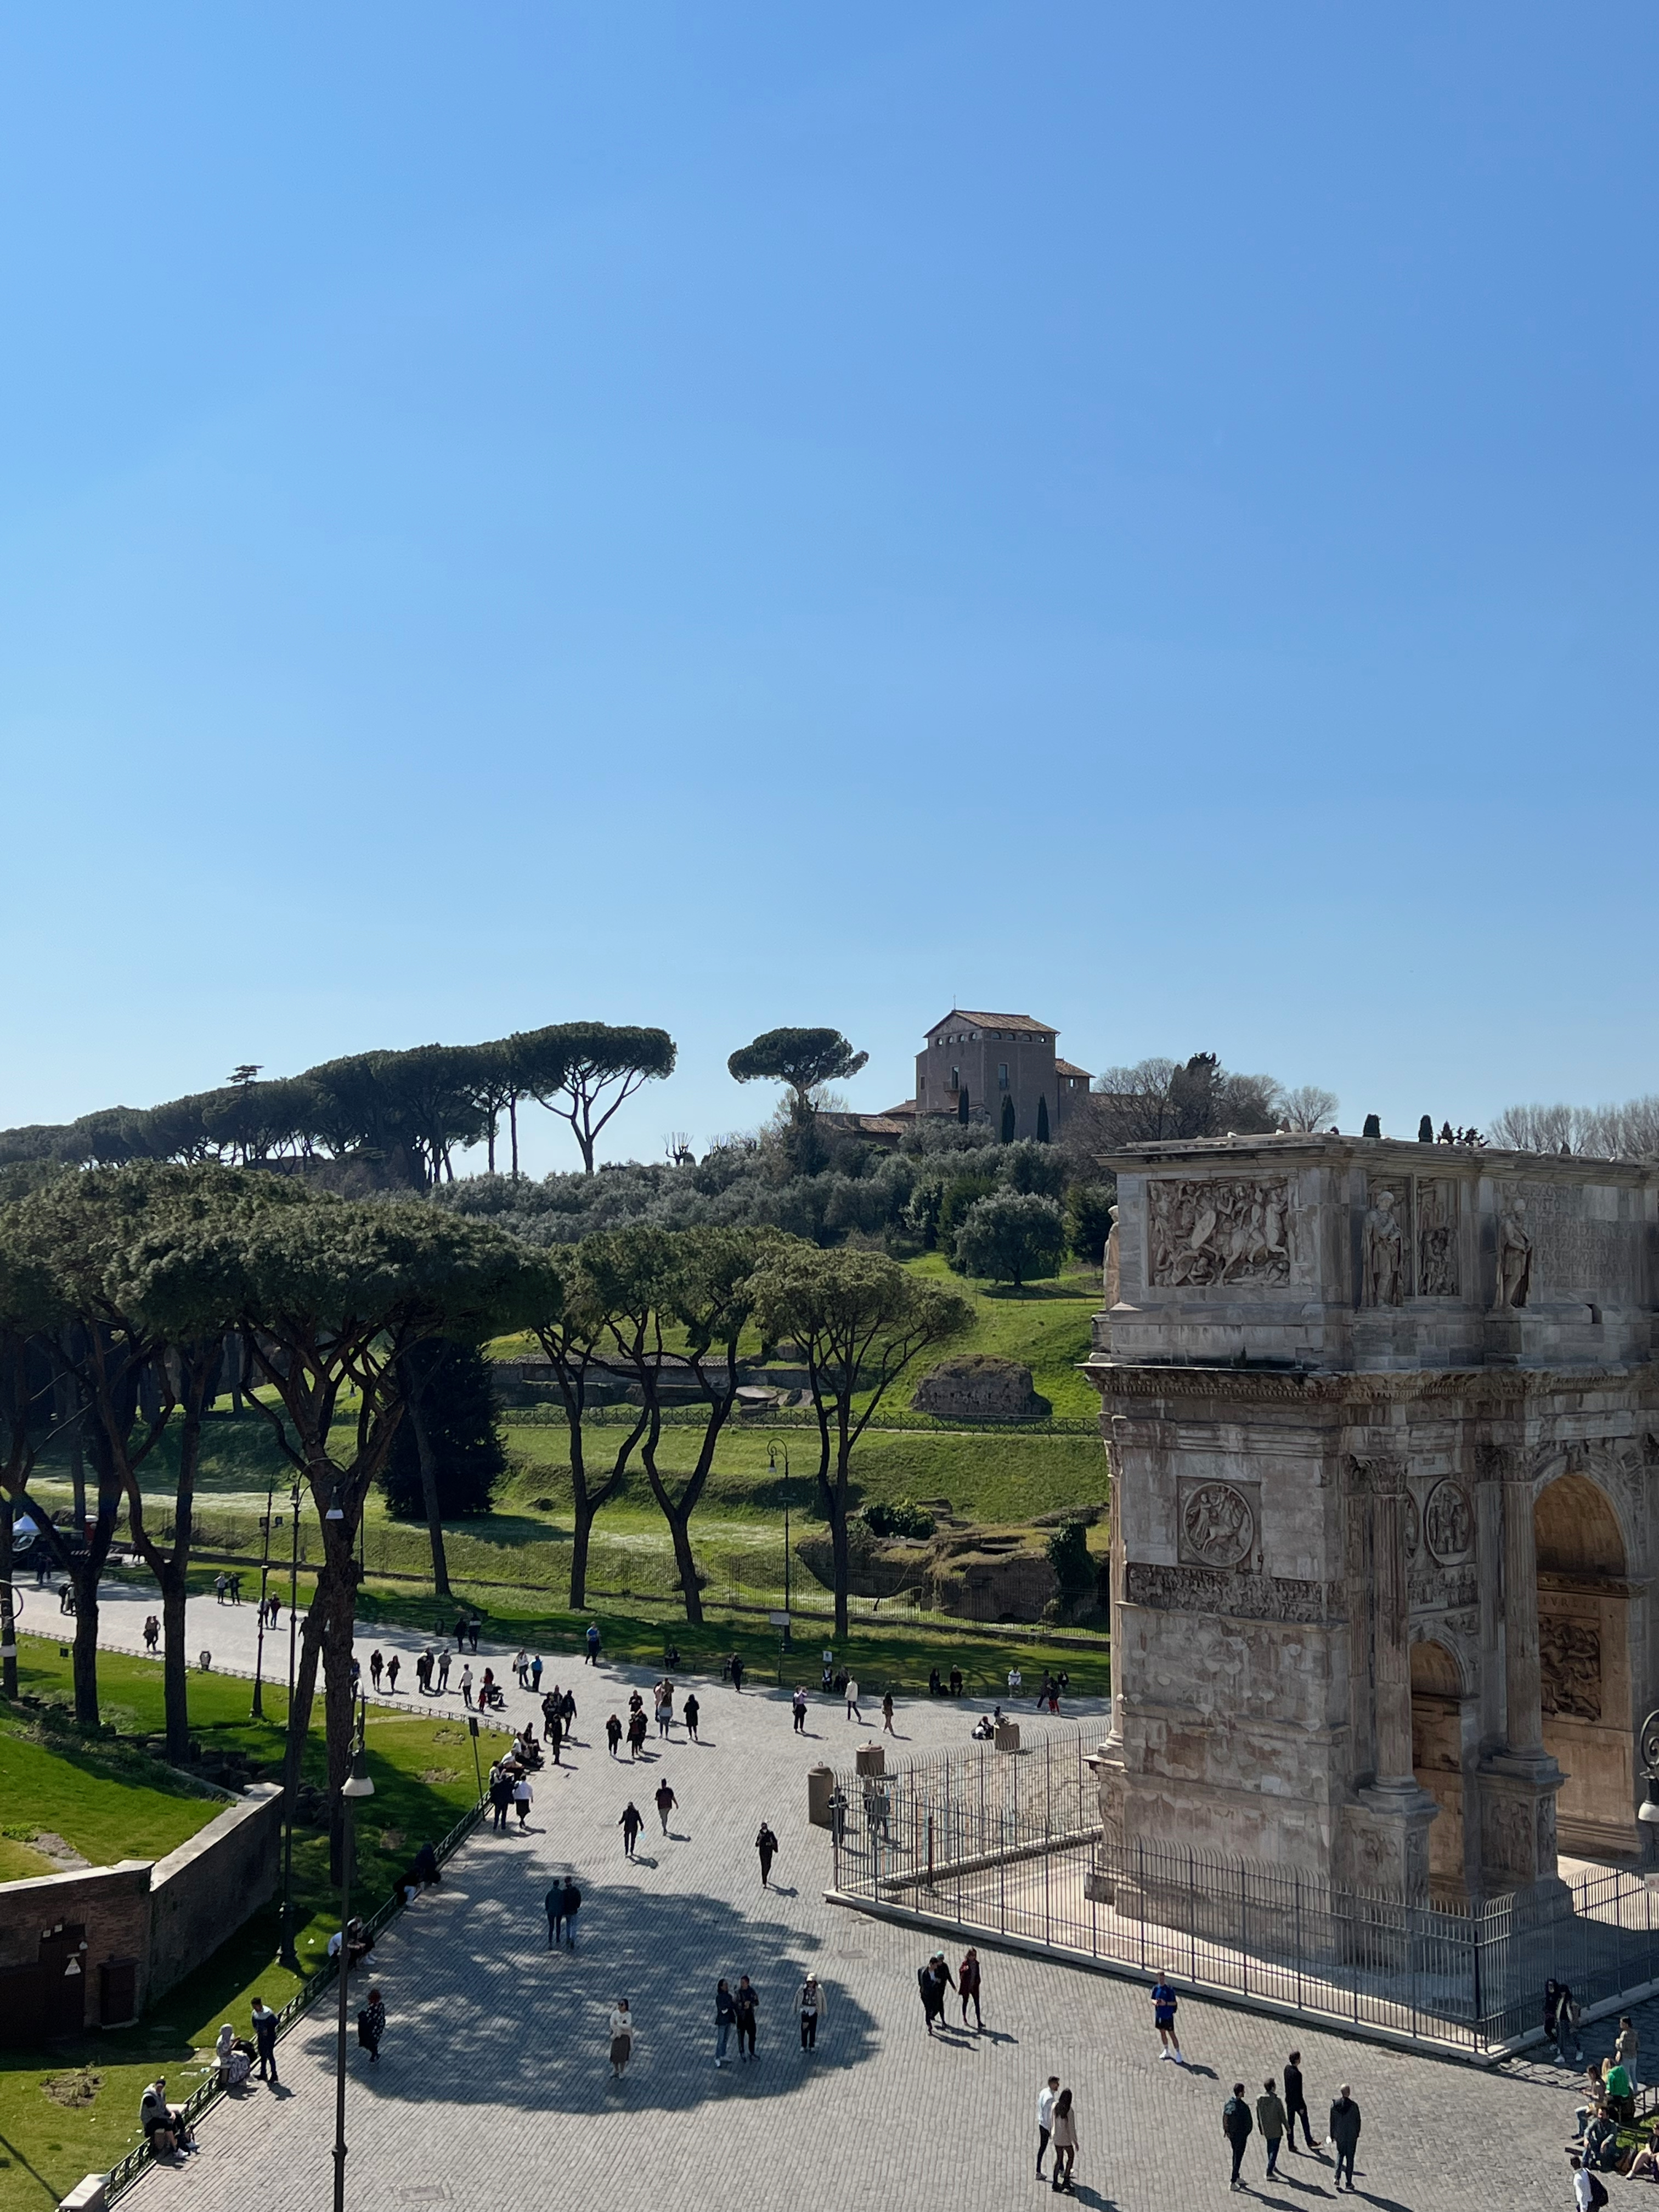 View from the Colloseum